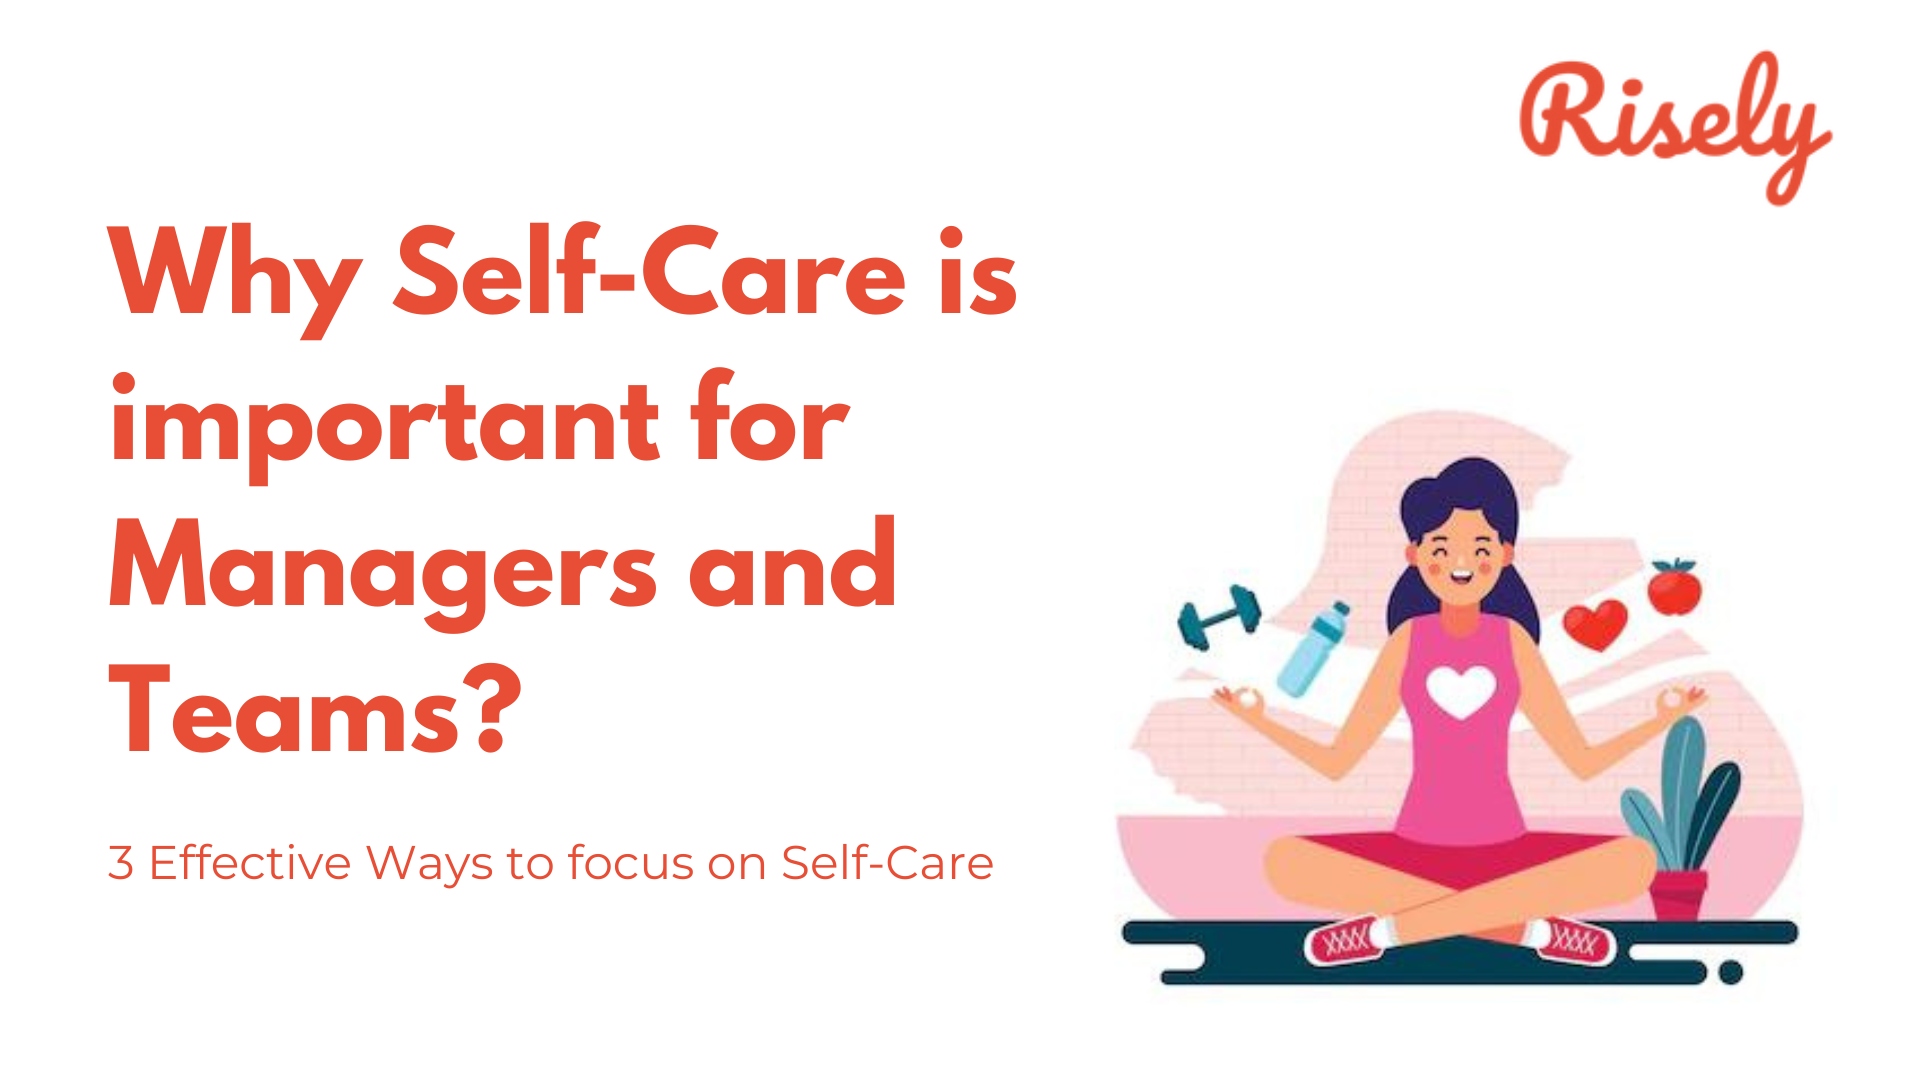 This image represent blog infographic on self-care.